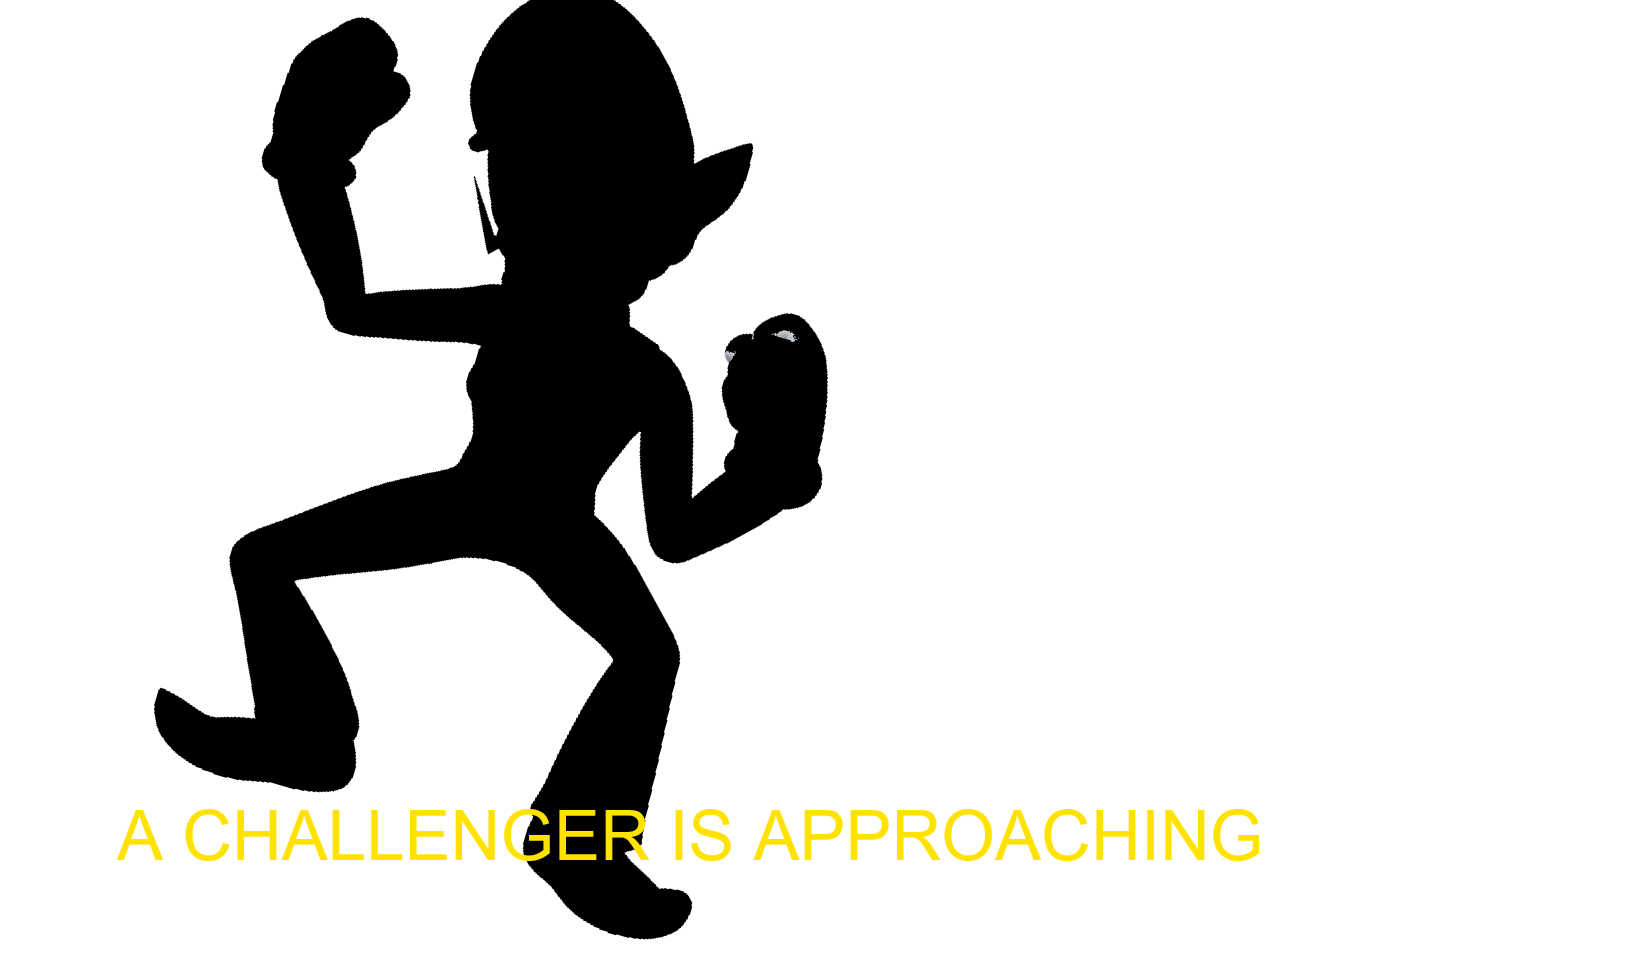 A challenger is approaching